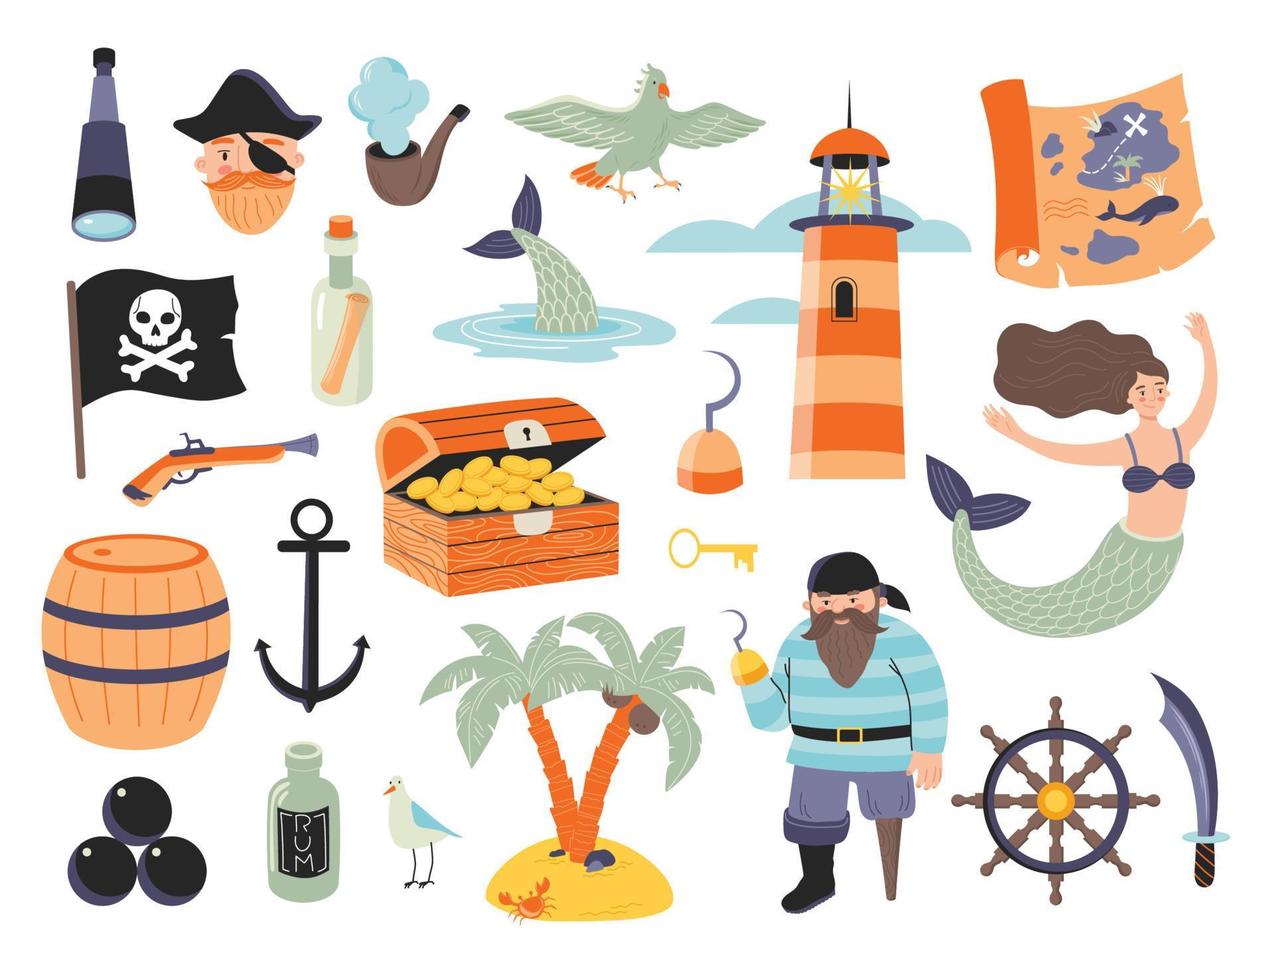 Pirate set with characters, mermaid, treasure map, chest, lighthouse, spyglass, rum, musket, jolly roger, palm islands etc. Bundle pirate vector